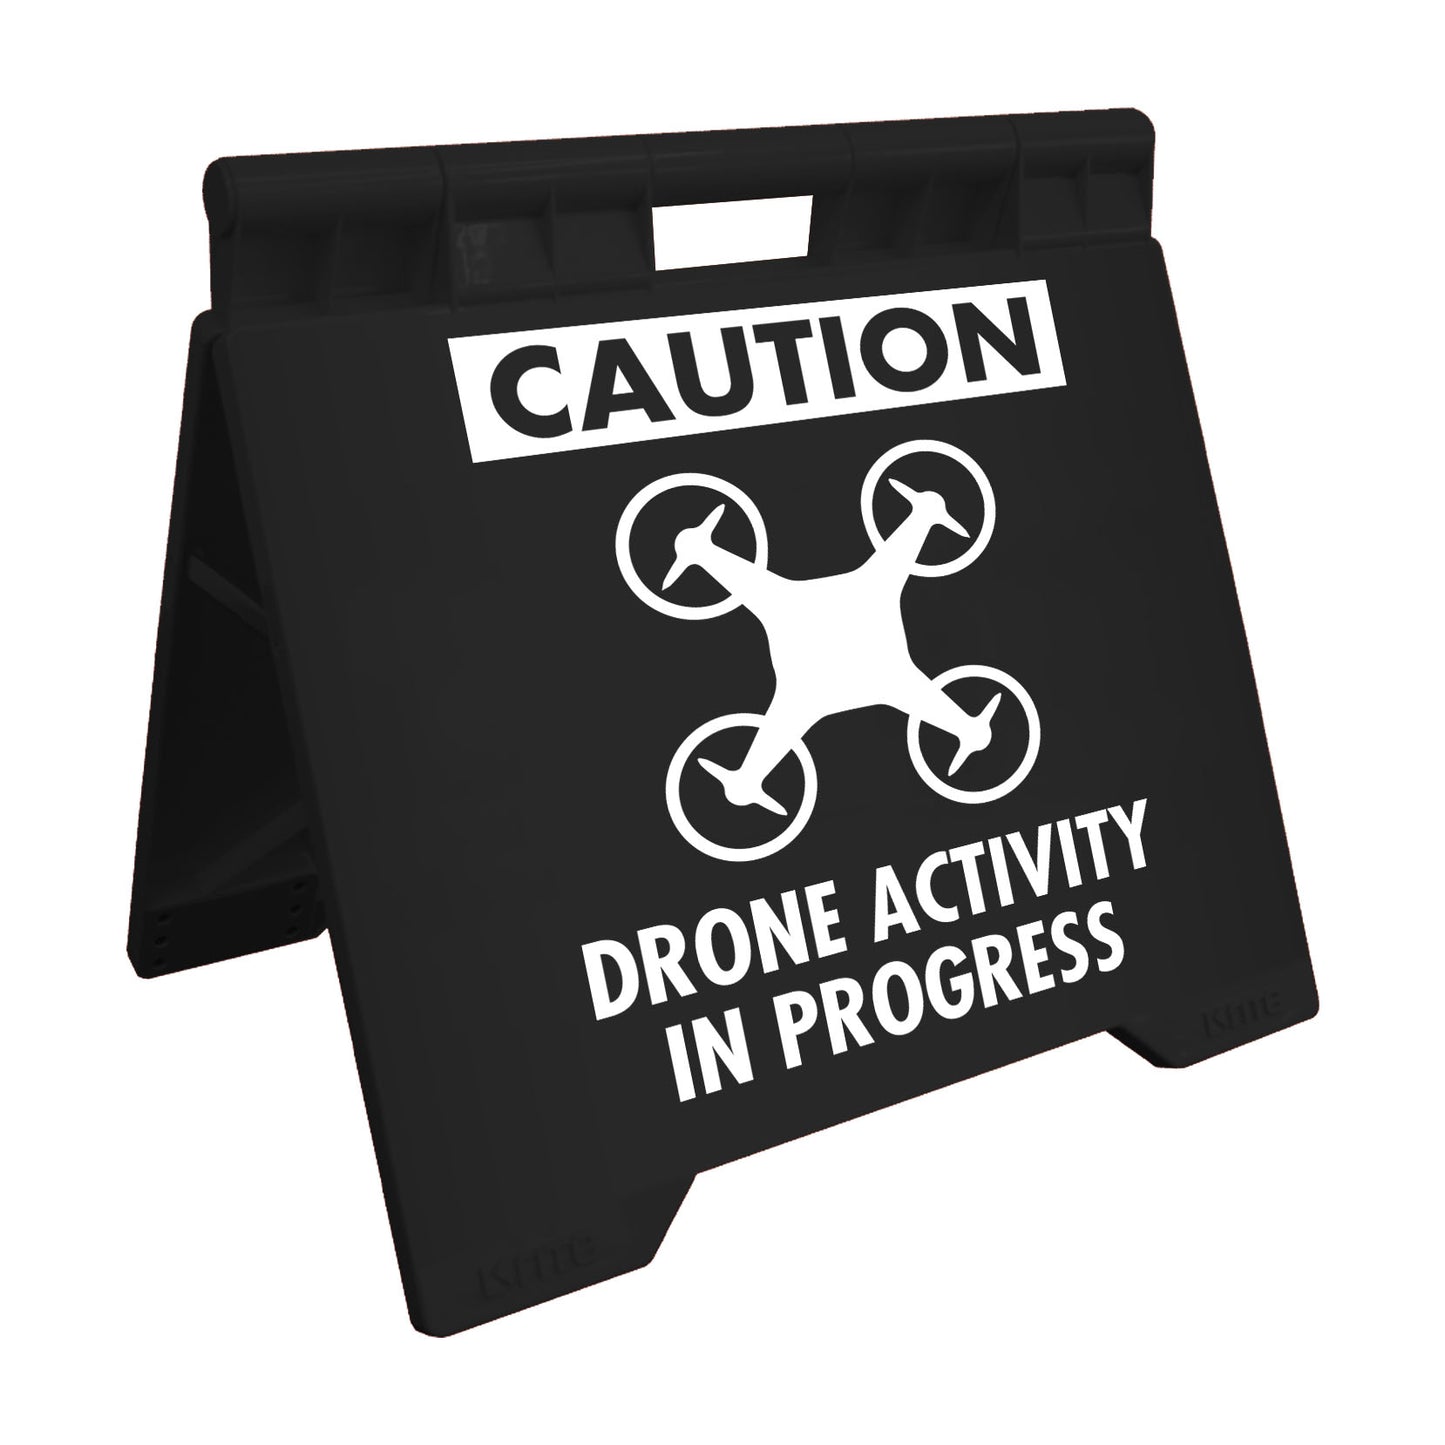 Caution Drone Activity In Progress - Evarite A-Frame Sign